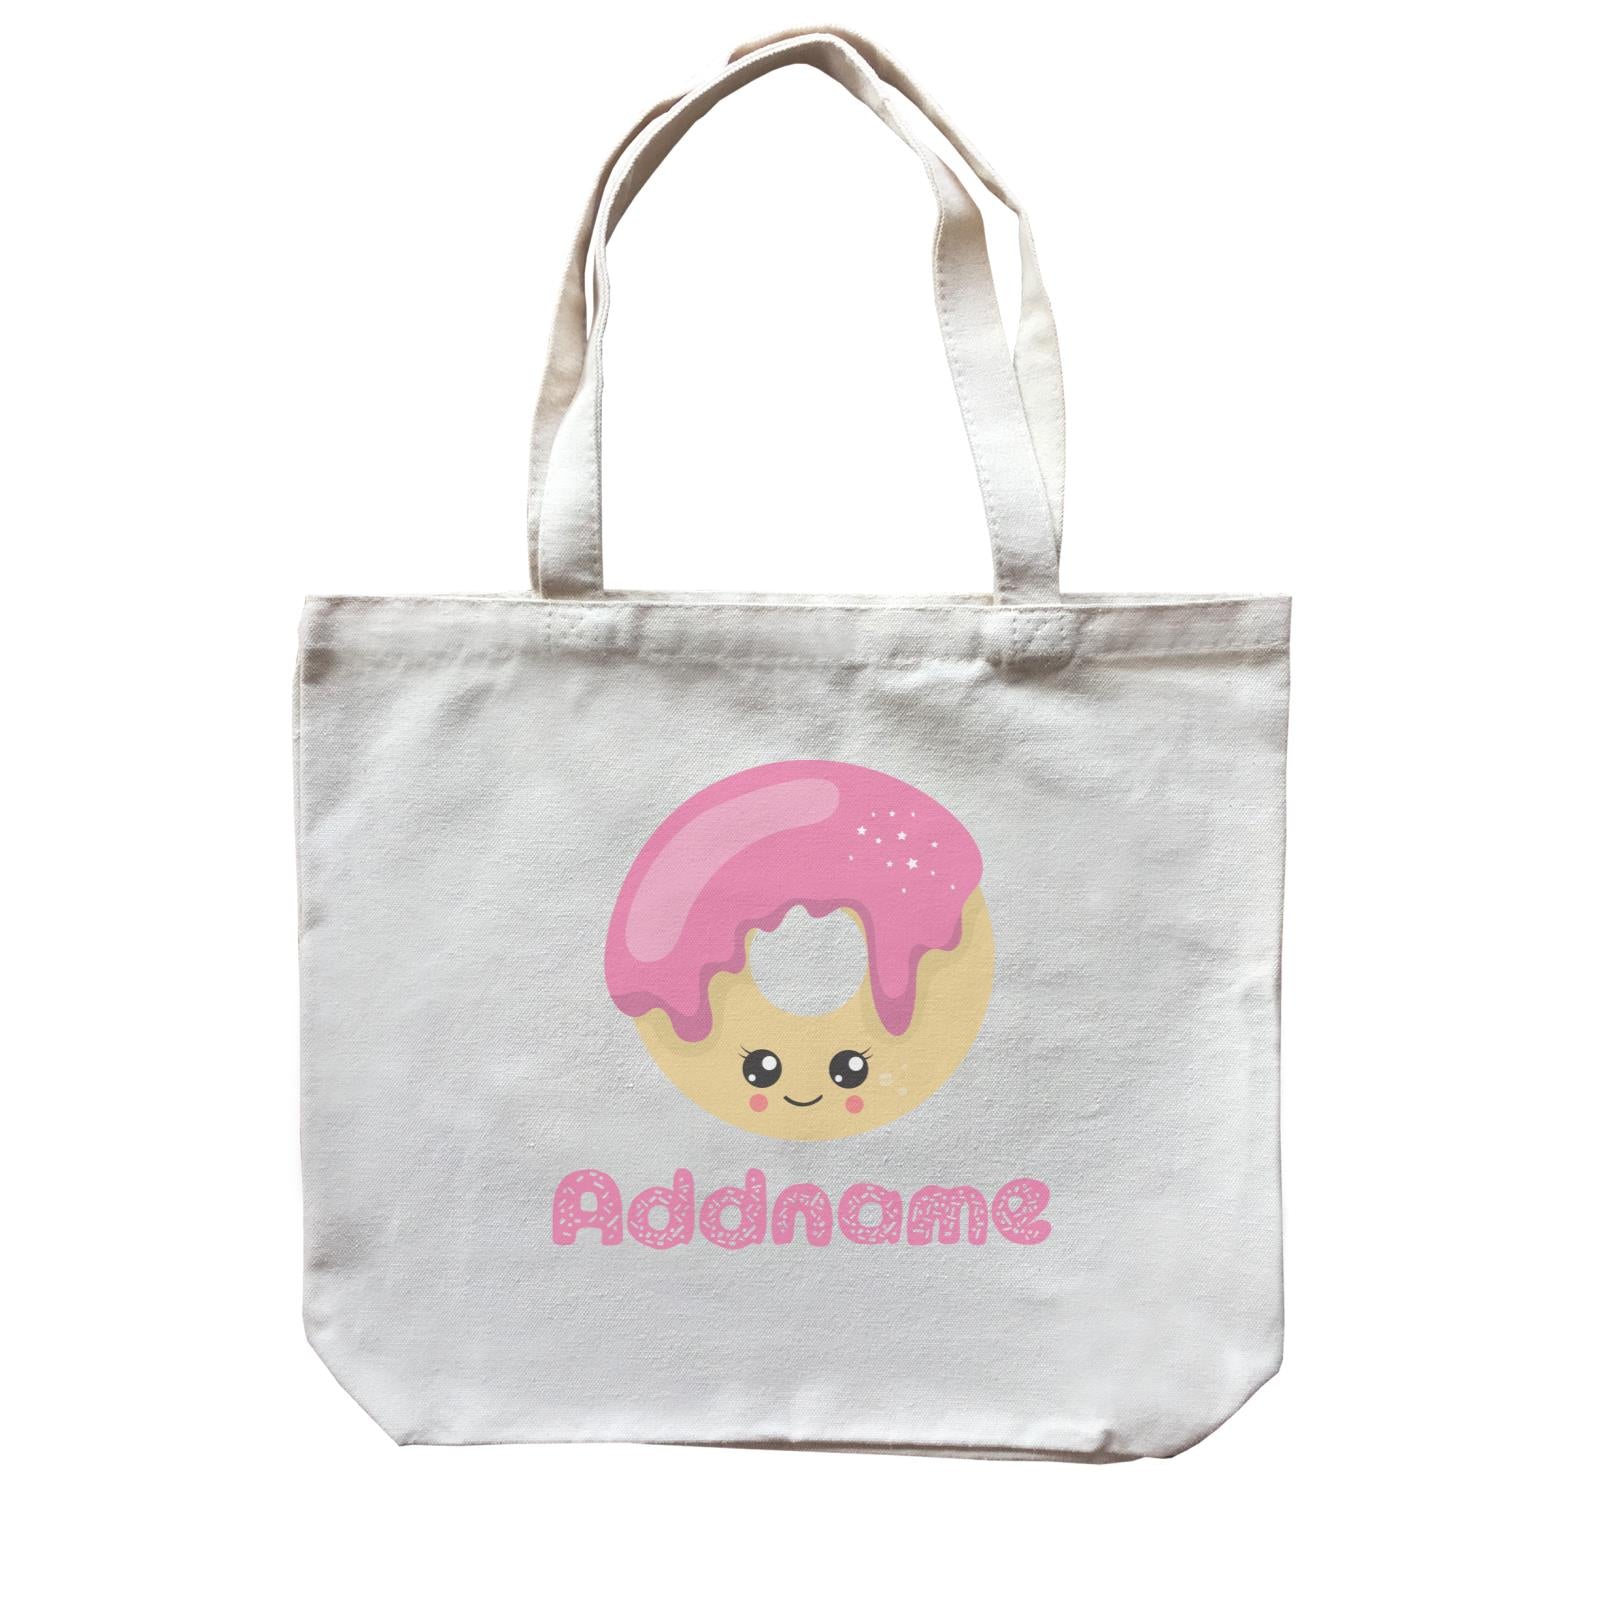 Magical Sweets Pink Donut Addname Canvas Bag